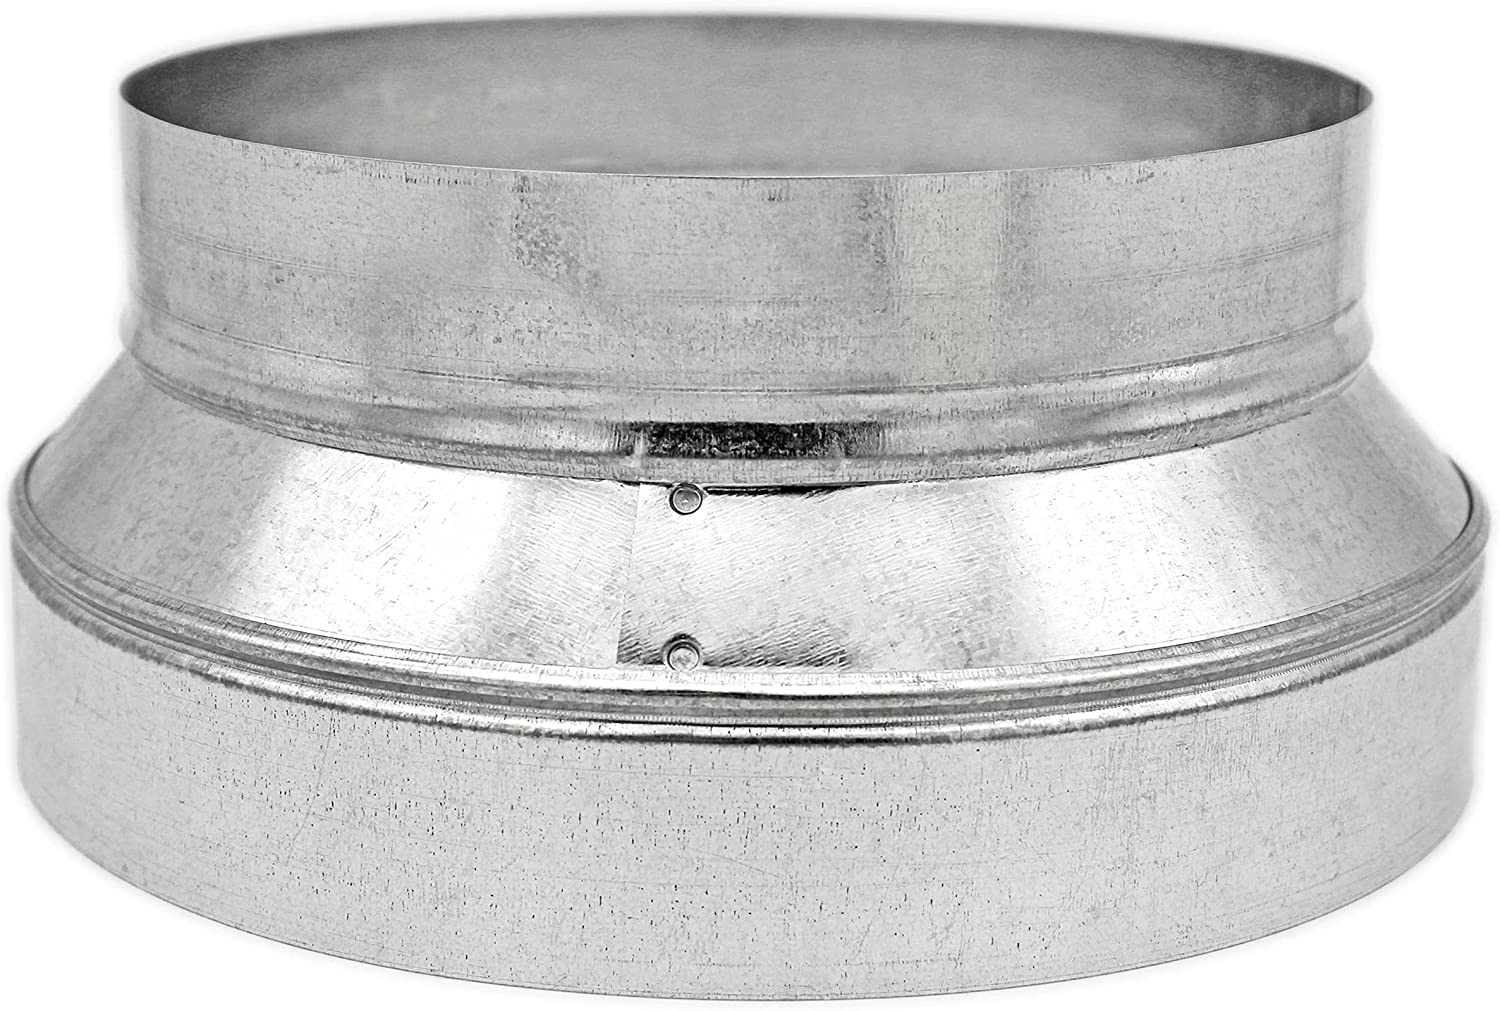 HVAC Premium Round Metal Pipe Reducer & Increaser | 10" to 9" HVAC Duct Reducer or Increaser 26g Gauge | Galvanized Sheet Metal Ducting Connector is Compatible with Duct 9"